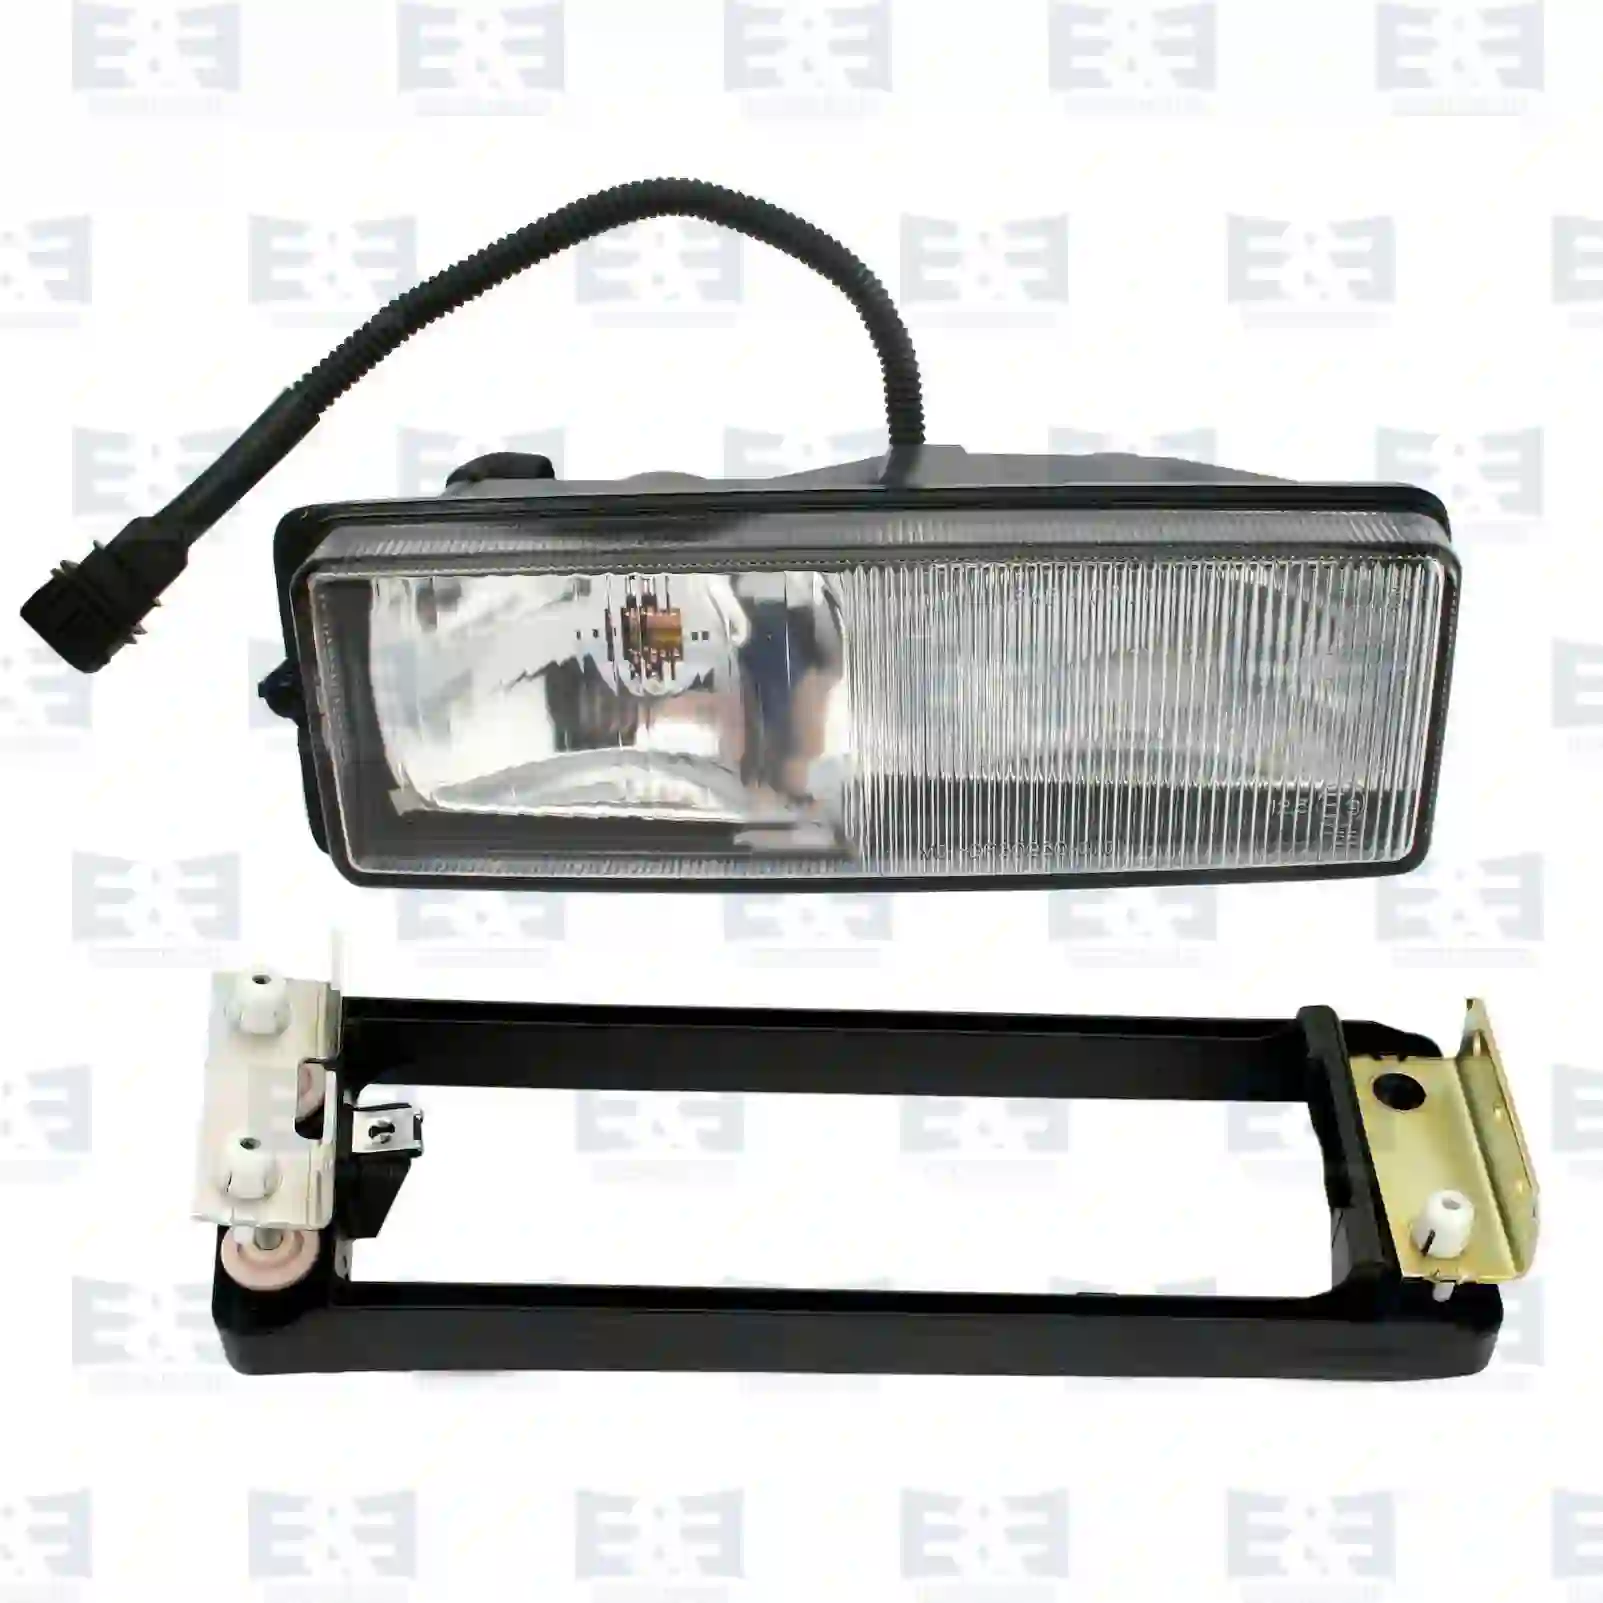 Auxiliary lamp, right, with bracket, 2E2298533, 1328861S1, ZG20263-0008 ||  2E2298533 E&E Truck Spare Parts | Truck Spare Parts, Auotomotive Spare Parts Auxiliary lamp, right, with bracket, 2E2298533, 1328861S1, ZG20263-0008 ||  2E2298533 E&E Truck Spare Parts | Truck Spare Parts, Auotomotive Spare Parts